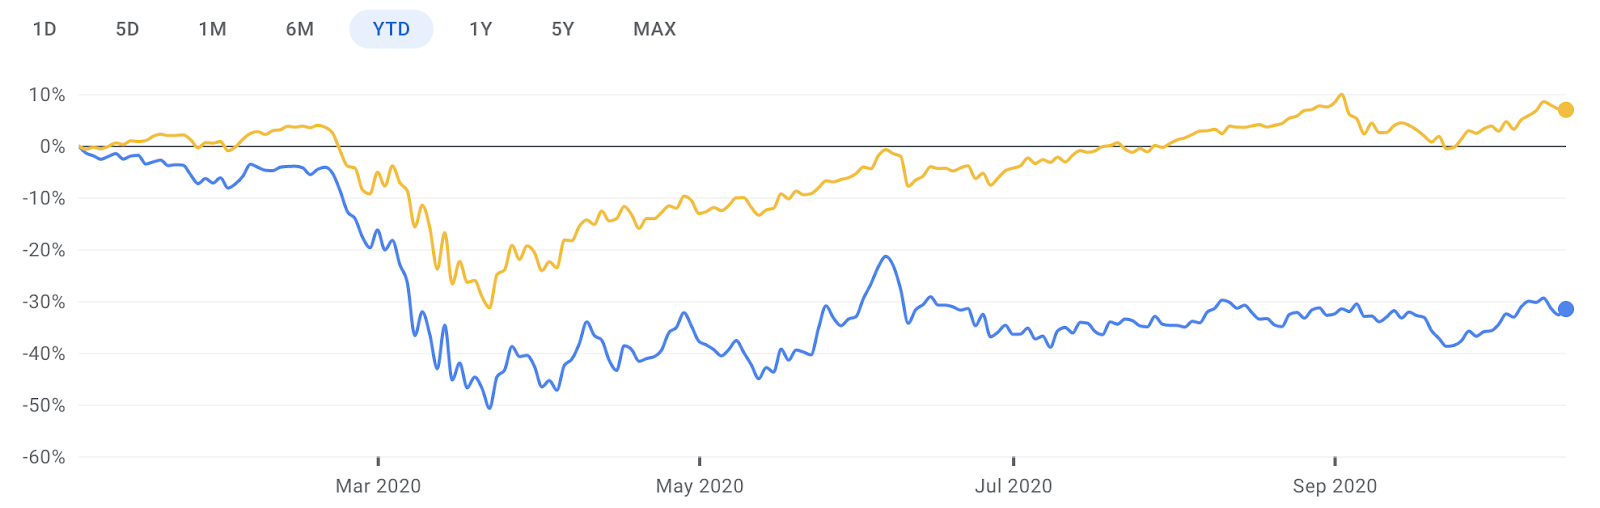 A comparison of the YTD performance of the KBW Nasdaq Bank Index and the S&P 500 Index